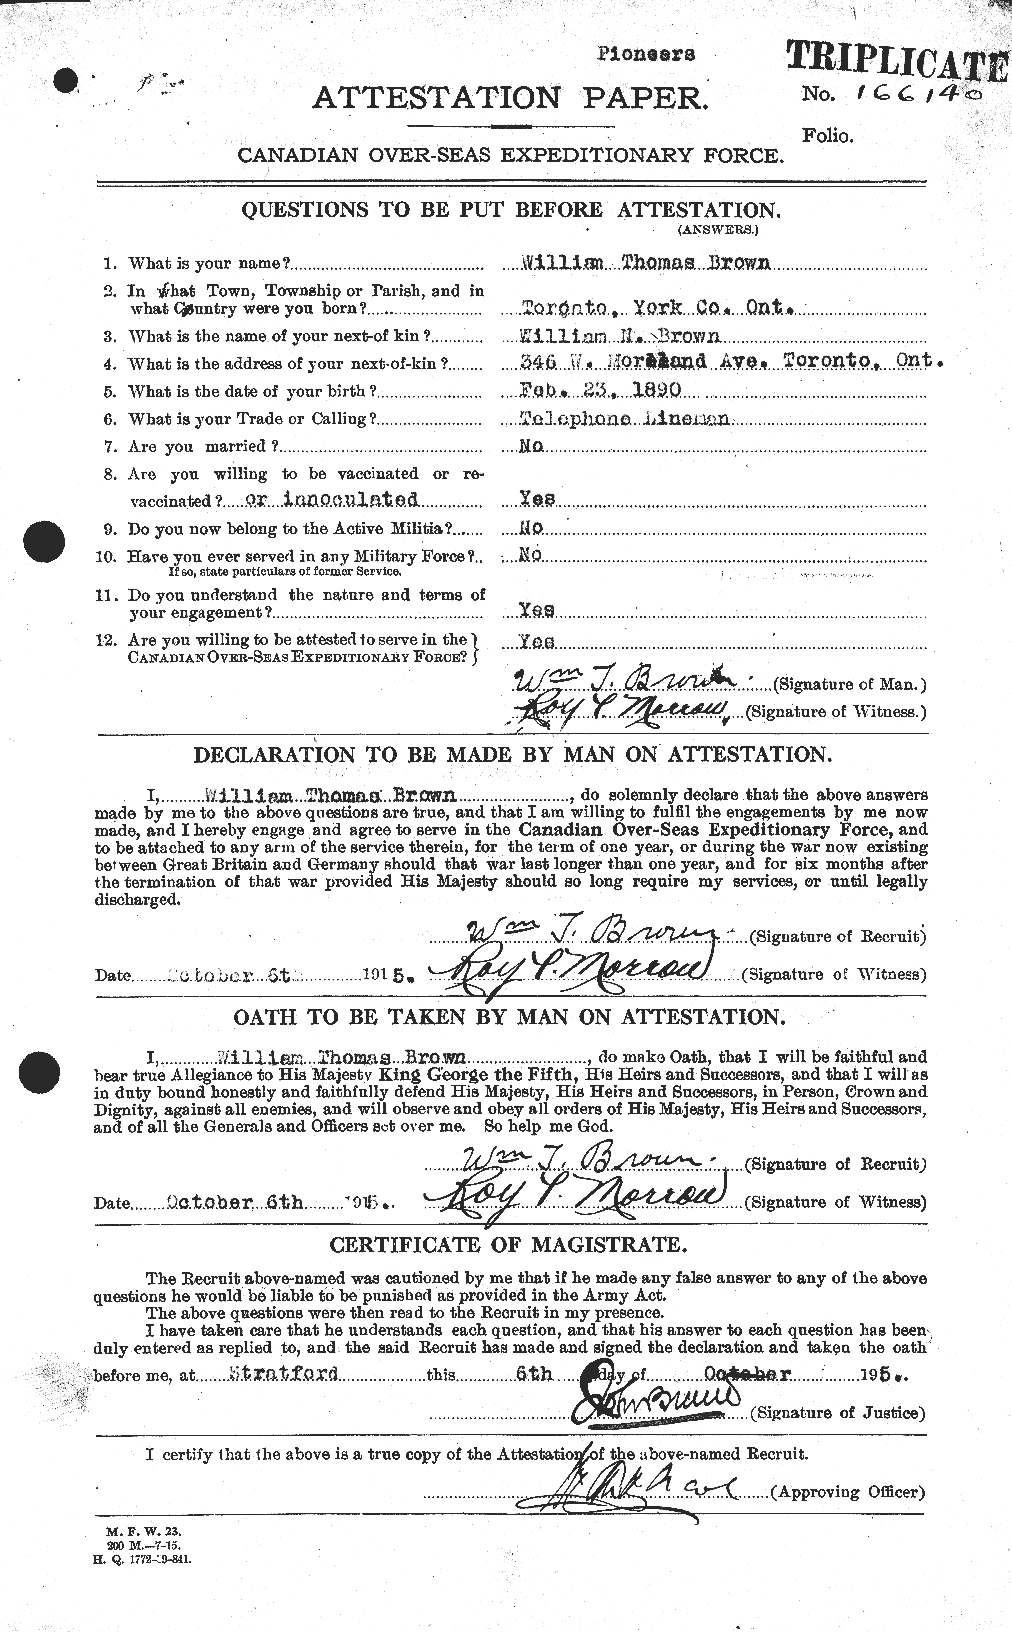 Personnel Records of the First World War - CEF 270888a